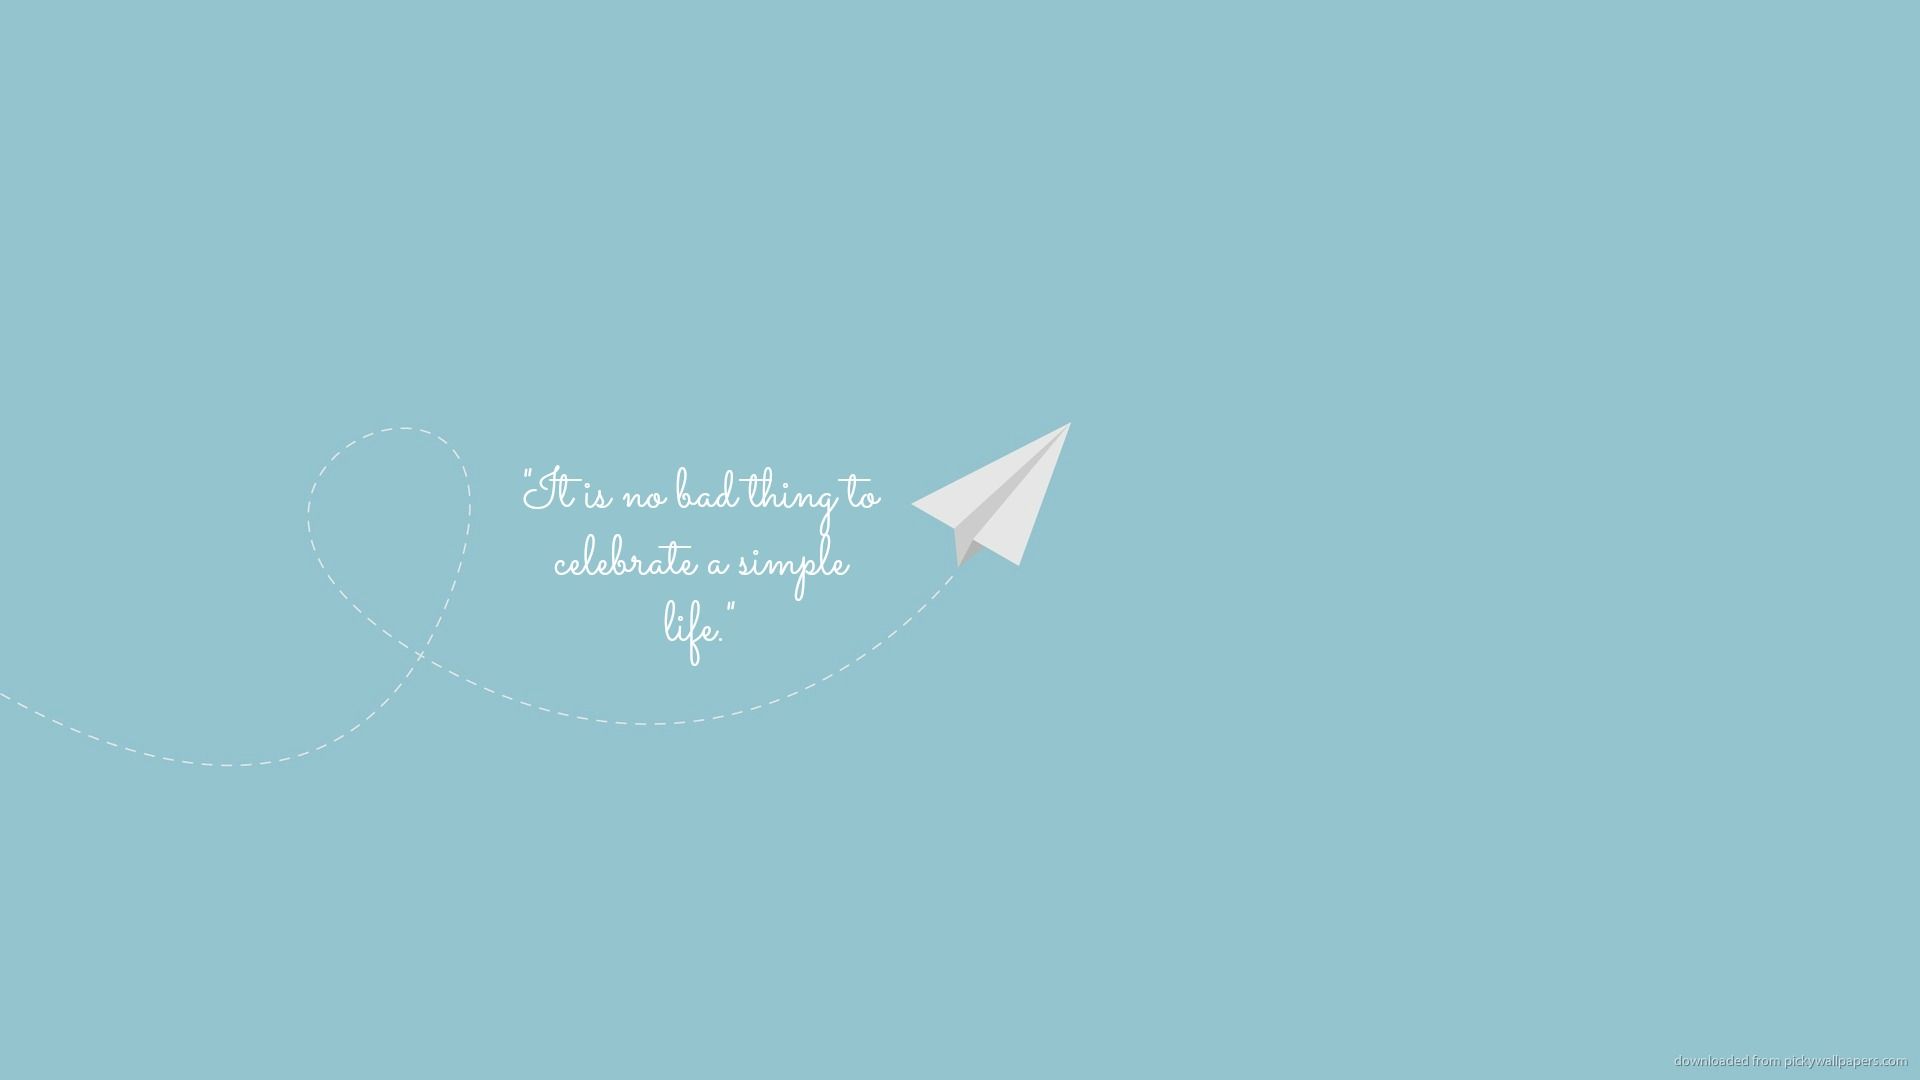 Celebrate simplicity Inspirational quotes wallpapers Wallpaper 1920x1080